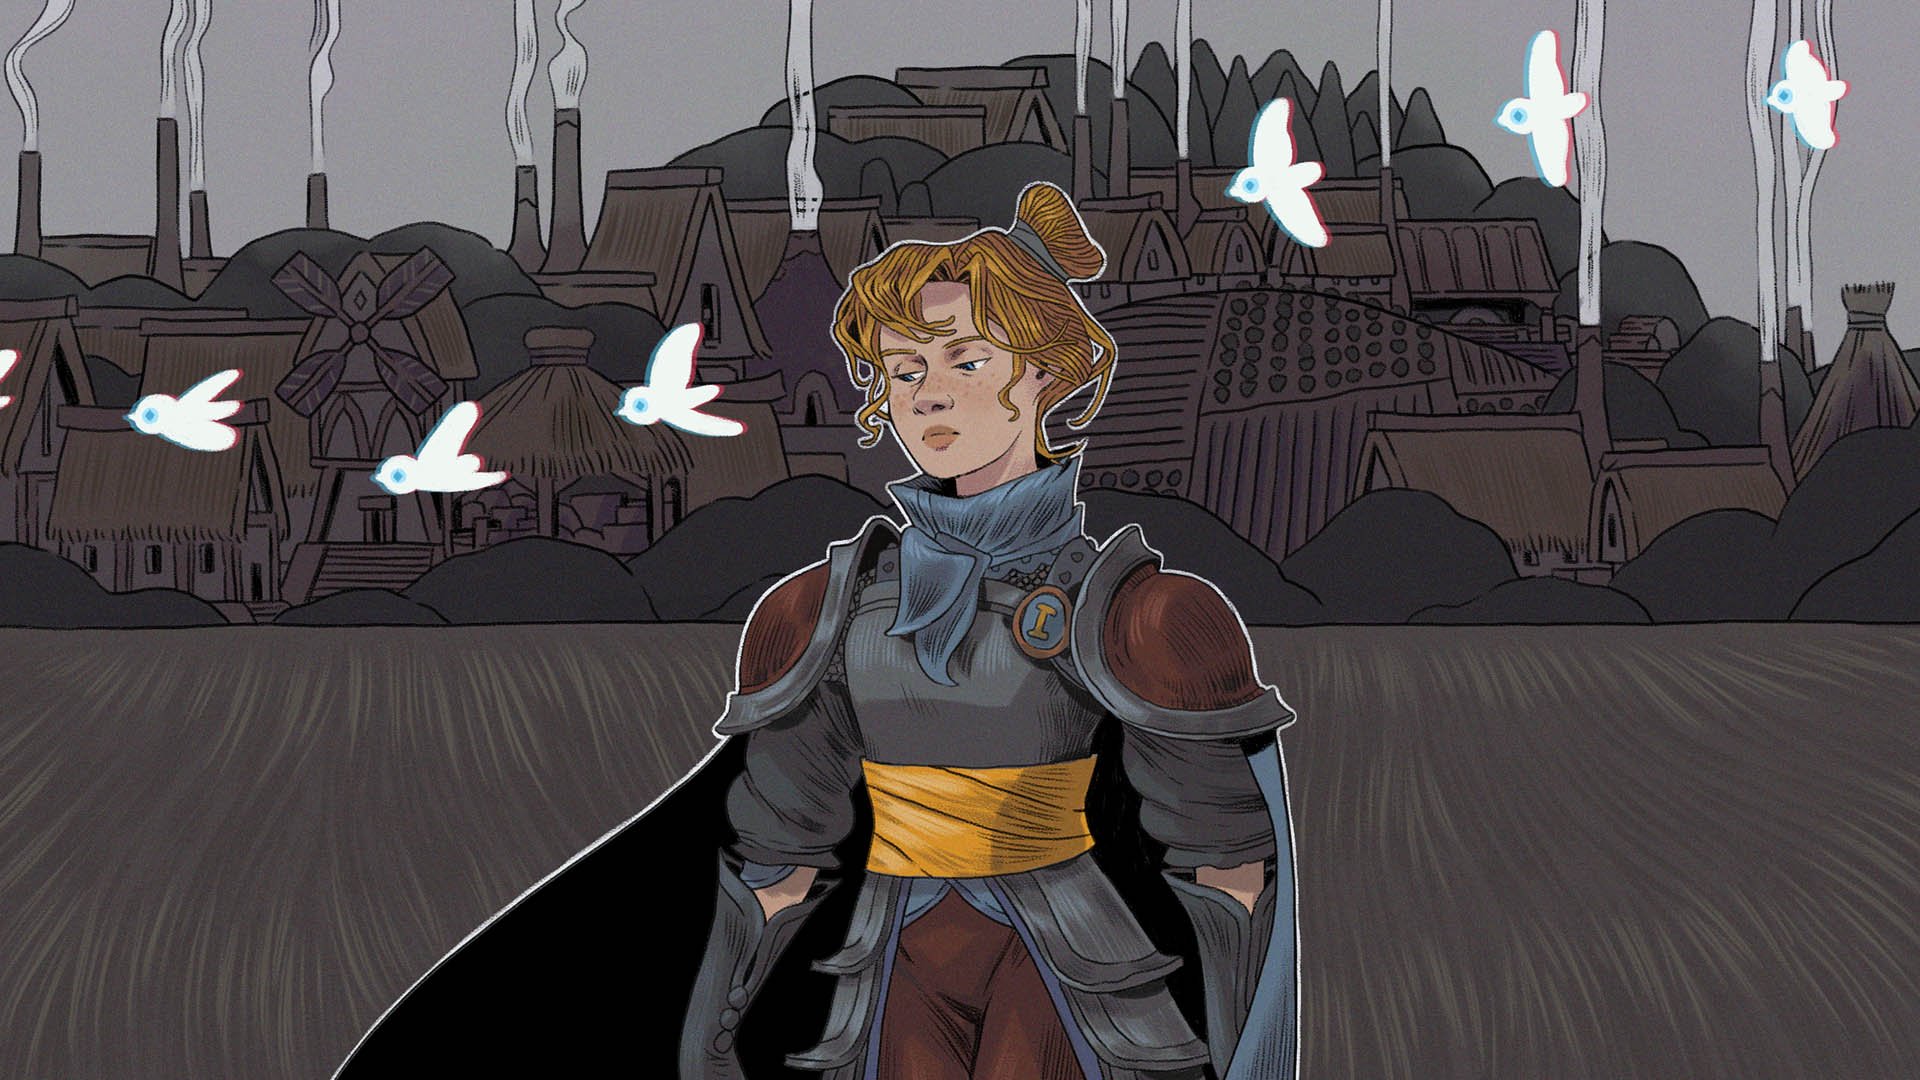 Loop Hero Concept Art of a Woman Knight